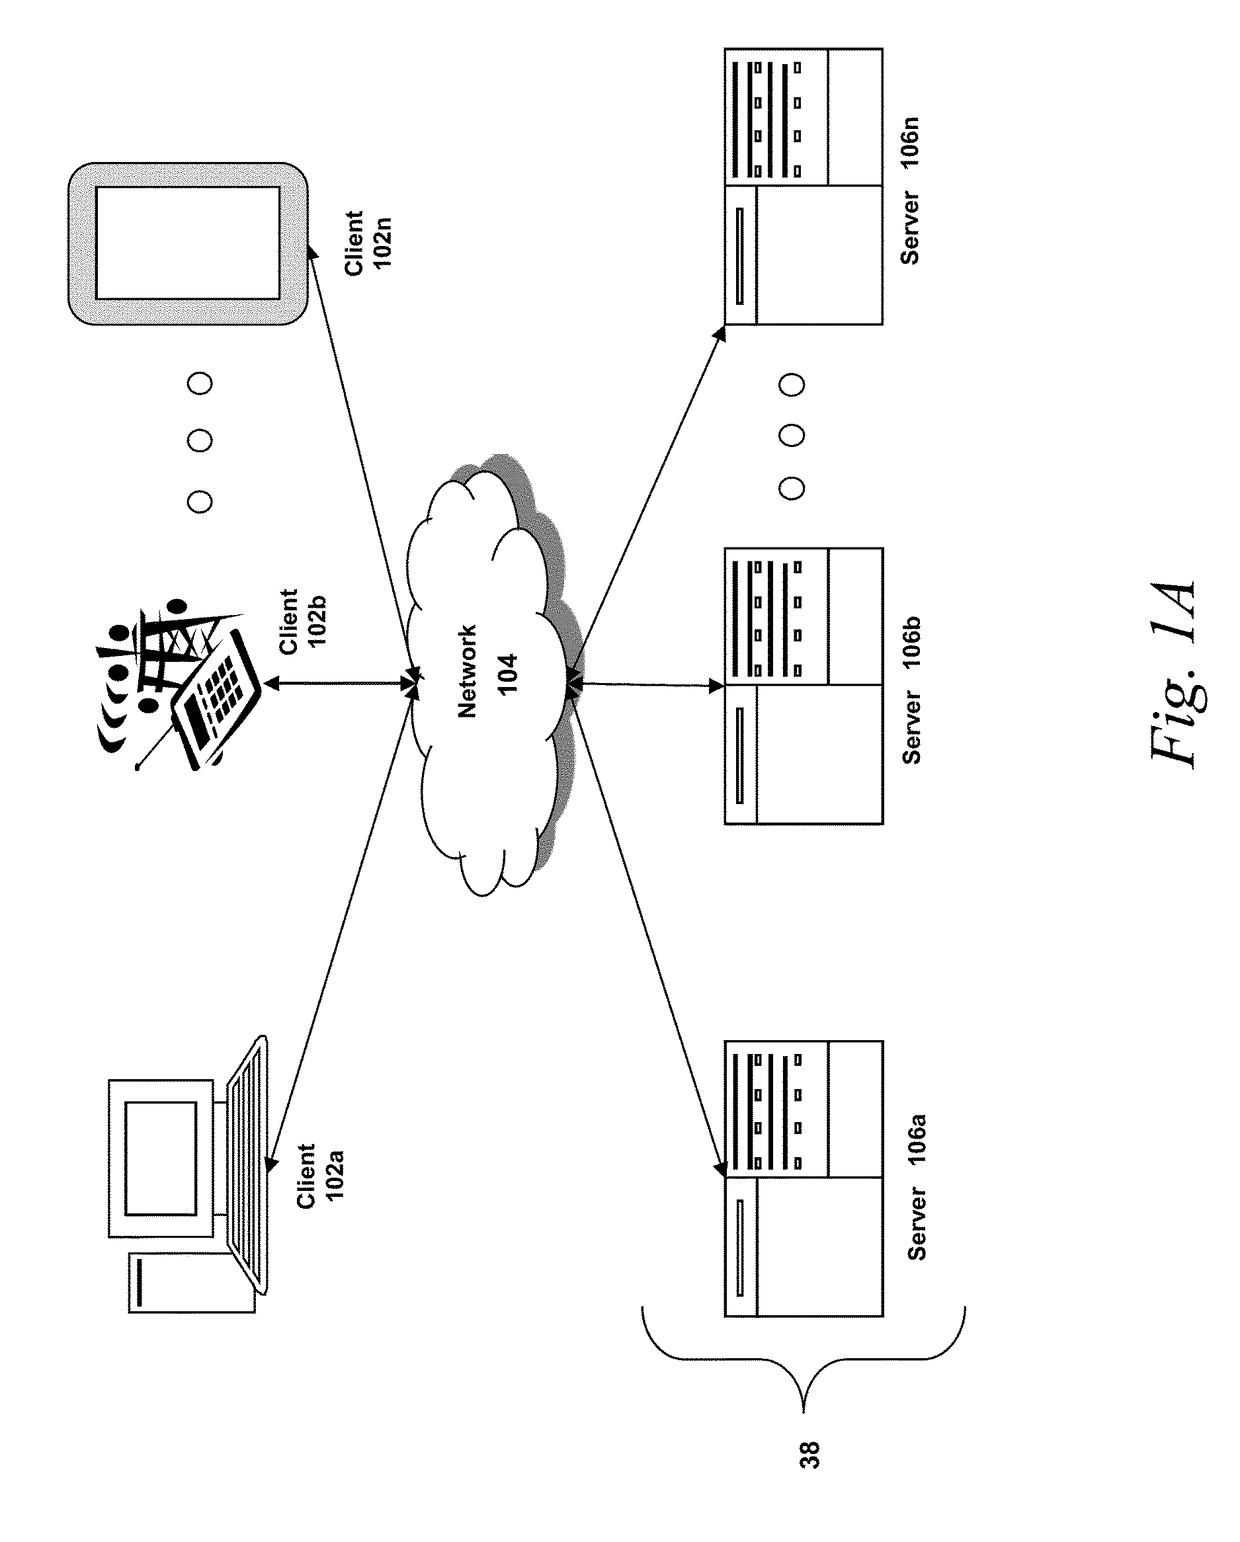 Systems and methods for performing or creating simulated phishing attacks and phishing attack campaigns